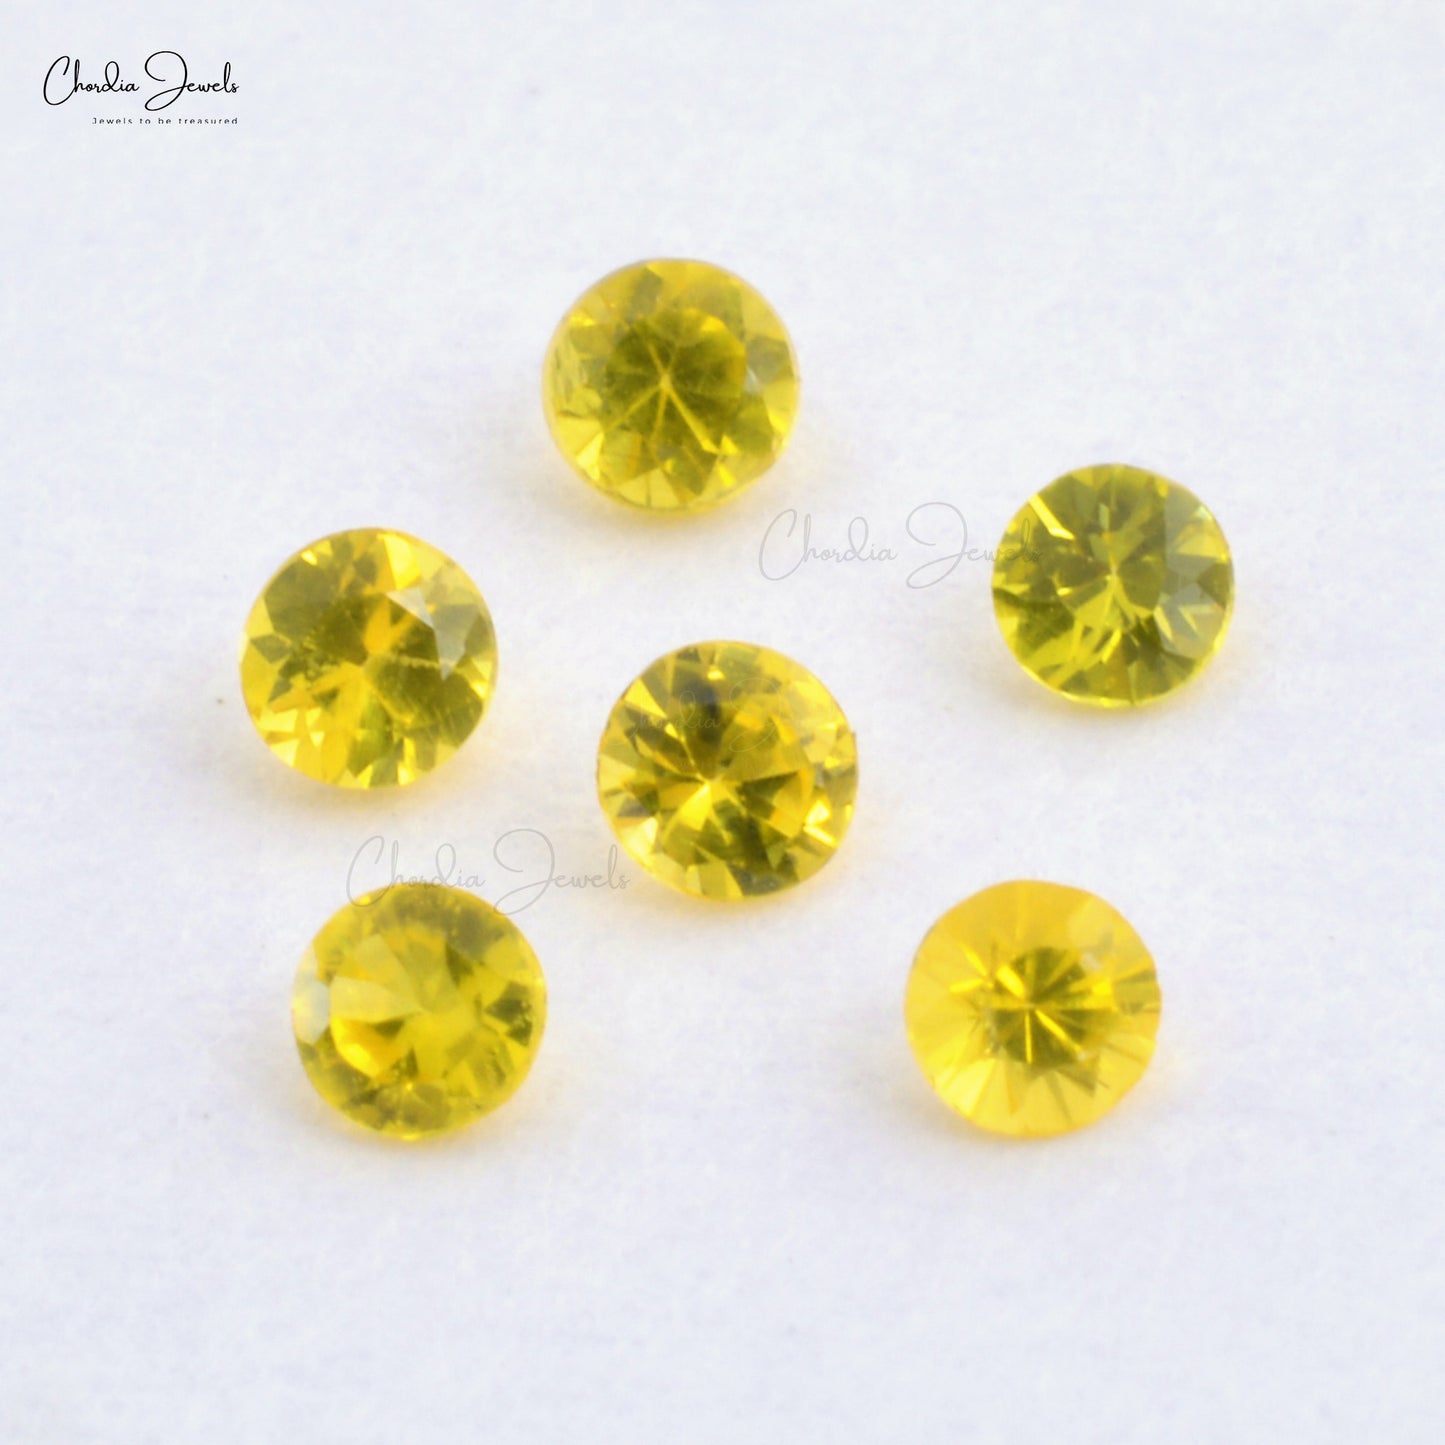 Brilliant Round-Cut Yellow 1.50 MM - 1.90 MM Sapphire AAA Gemstones, Weighing 0.02-0.03 carats from Chordia Jewels 